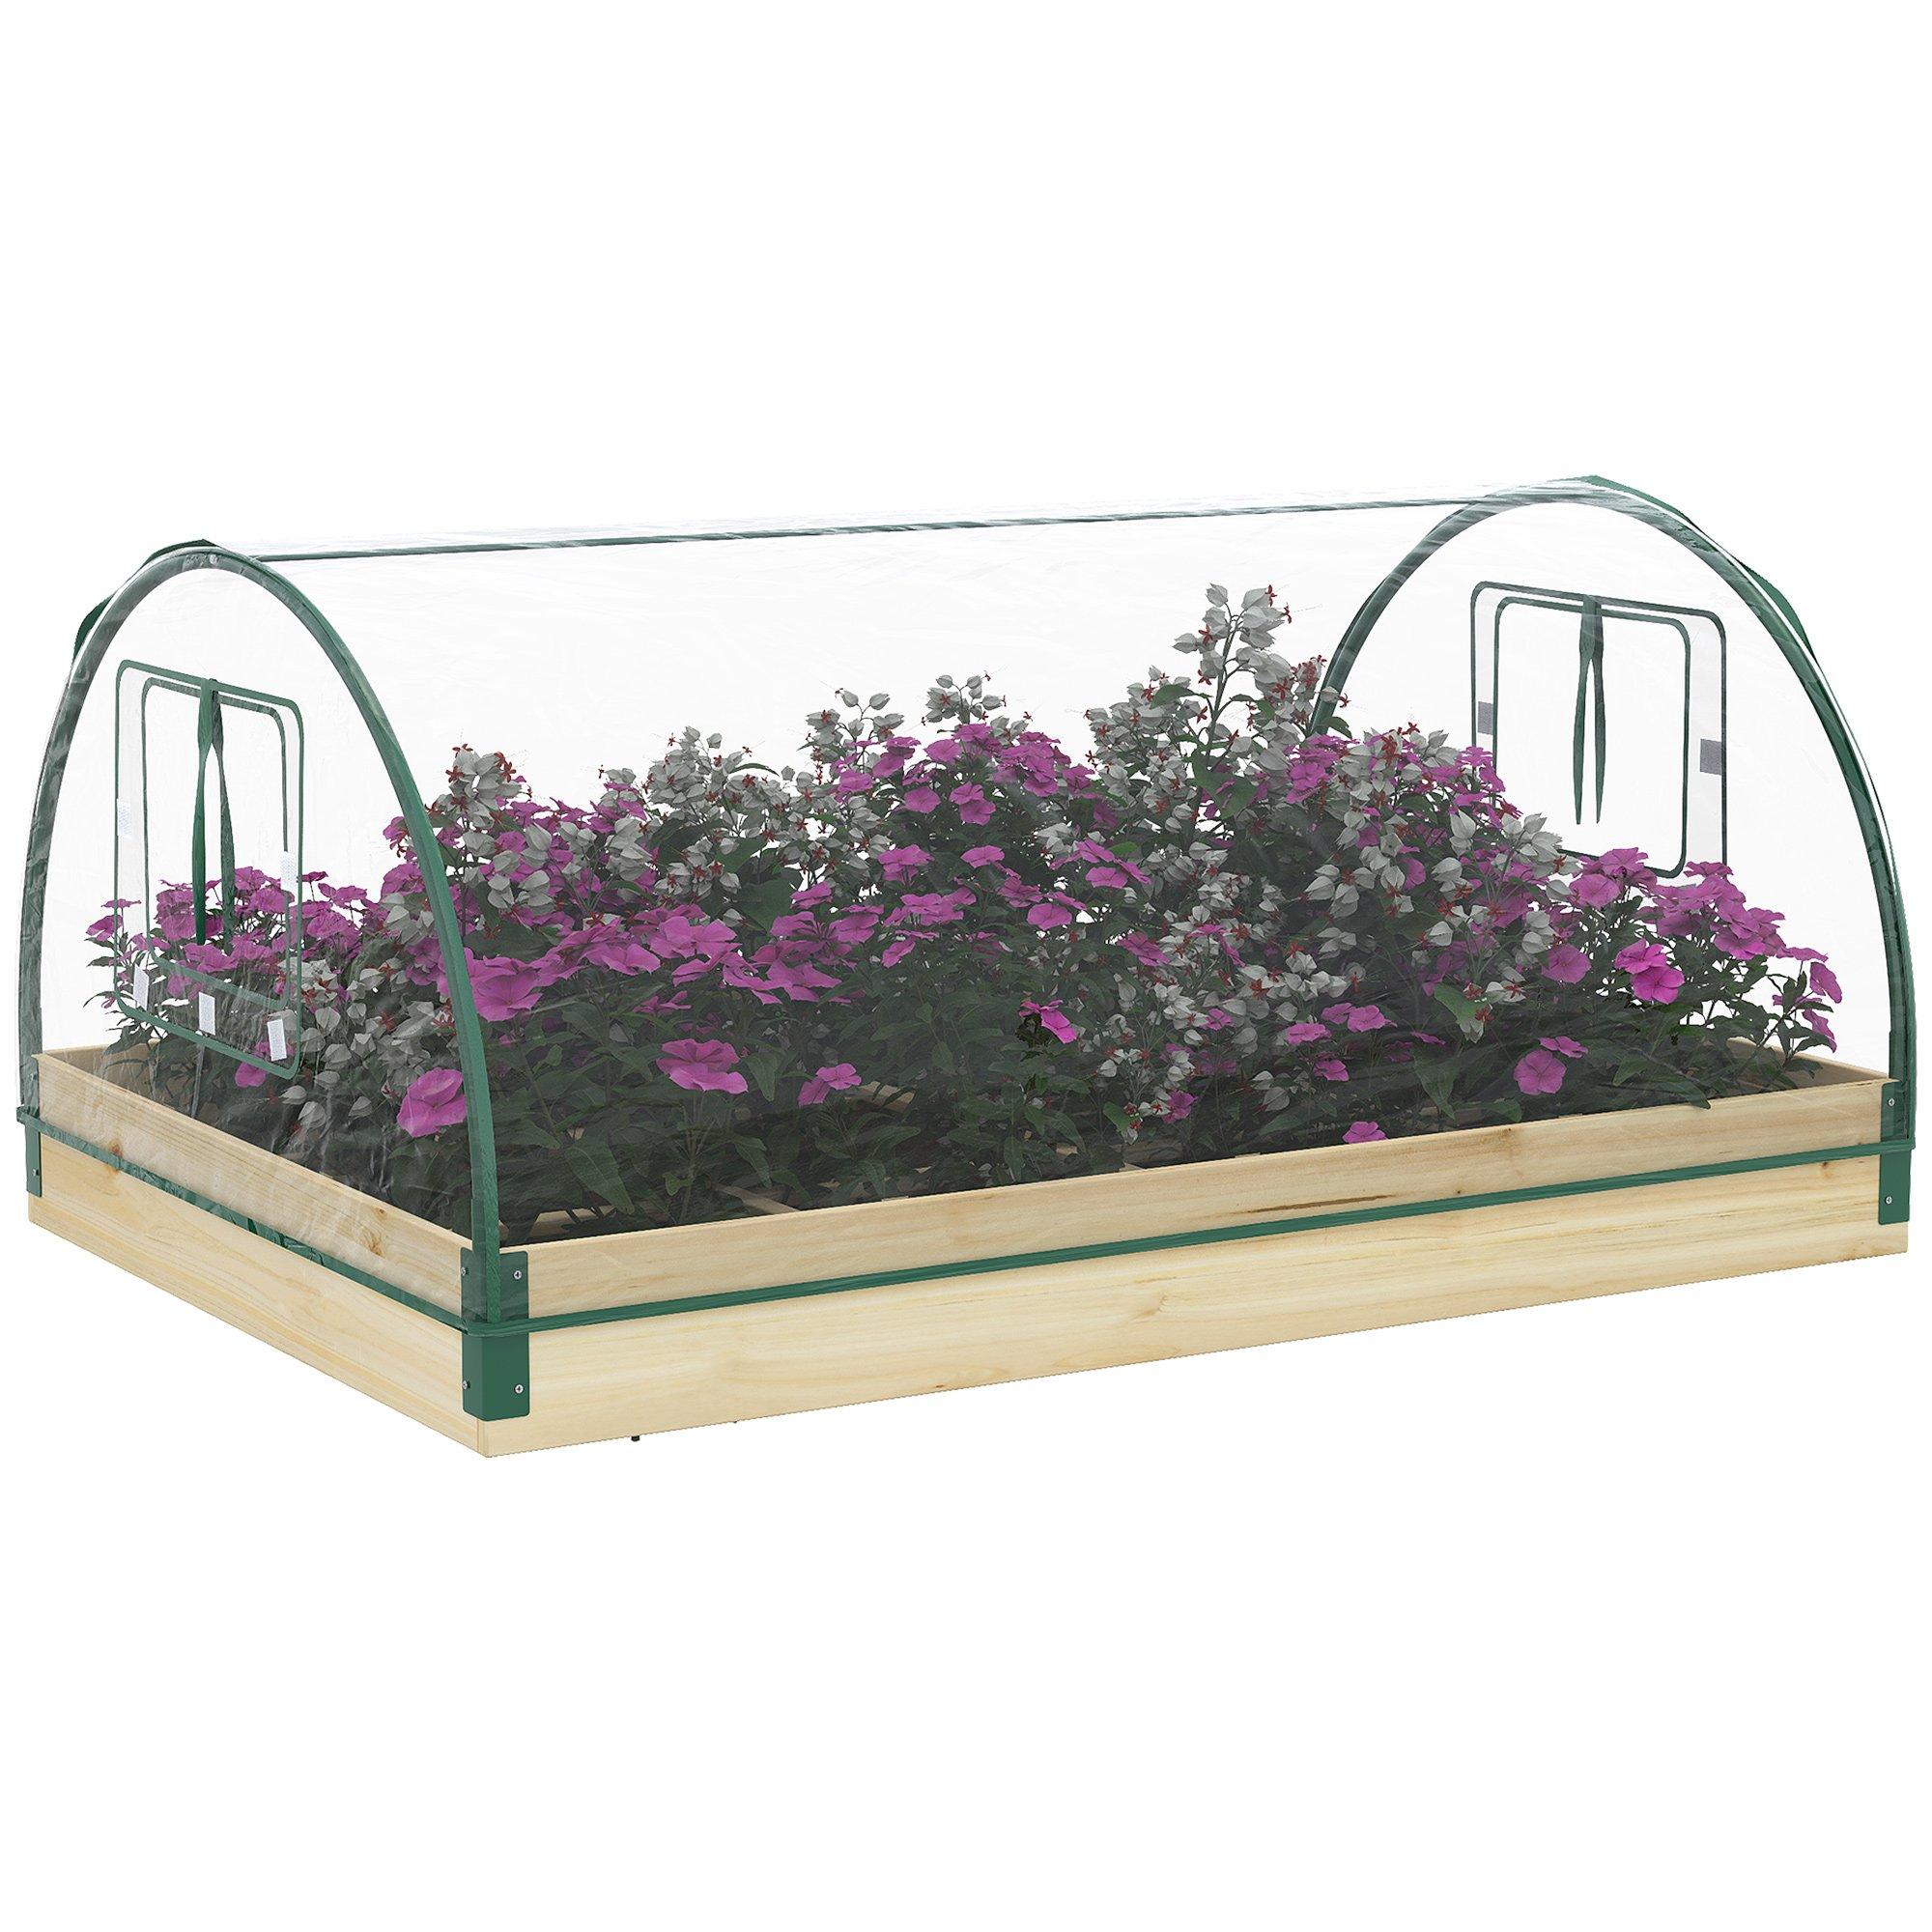 Raised Garden Bed with Greenhouse Roll Up Windows 115 x 80 x 54 cm